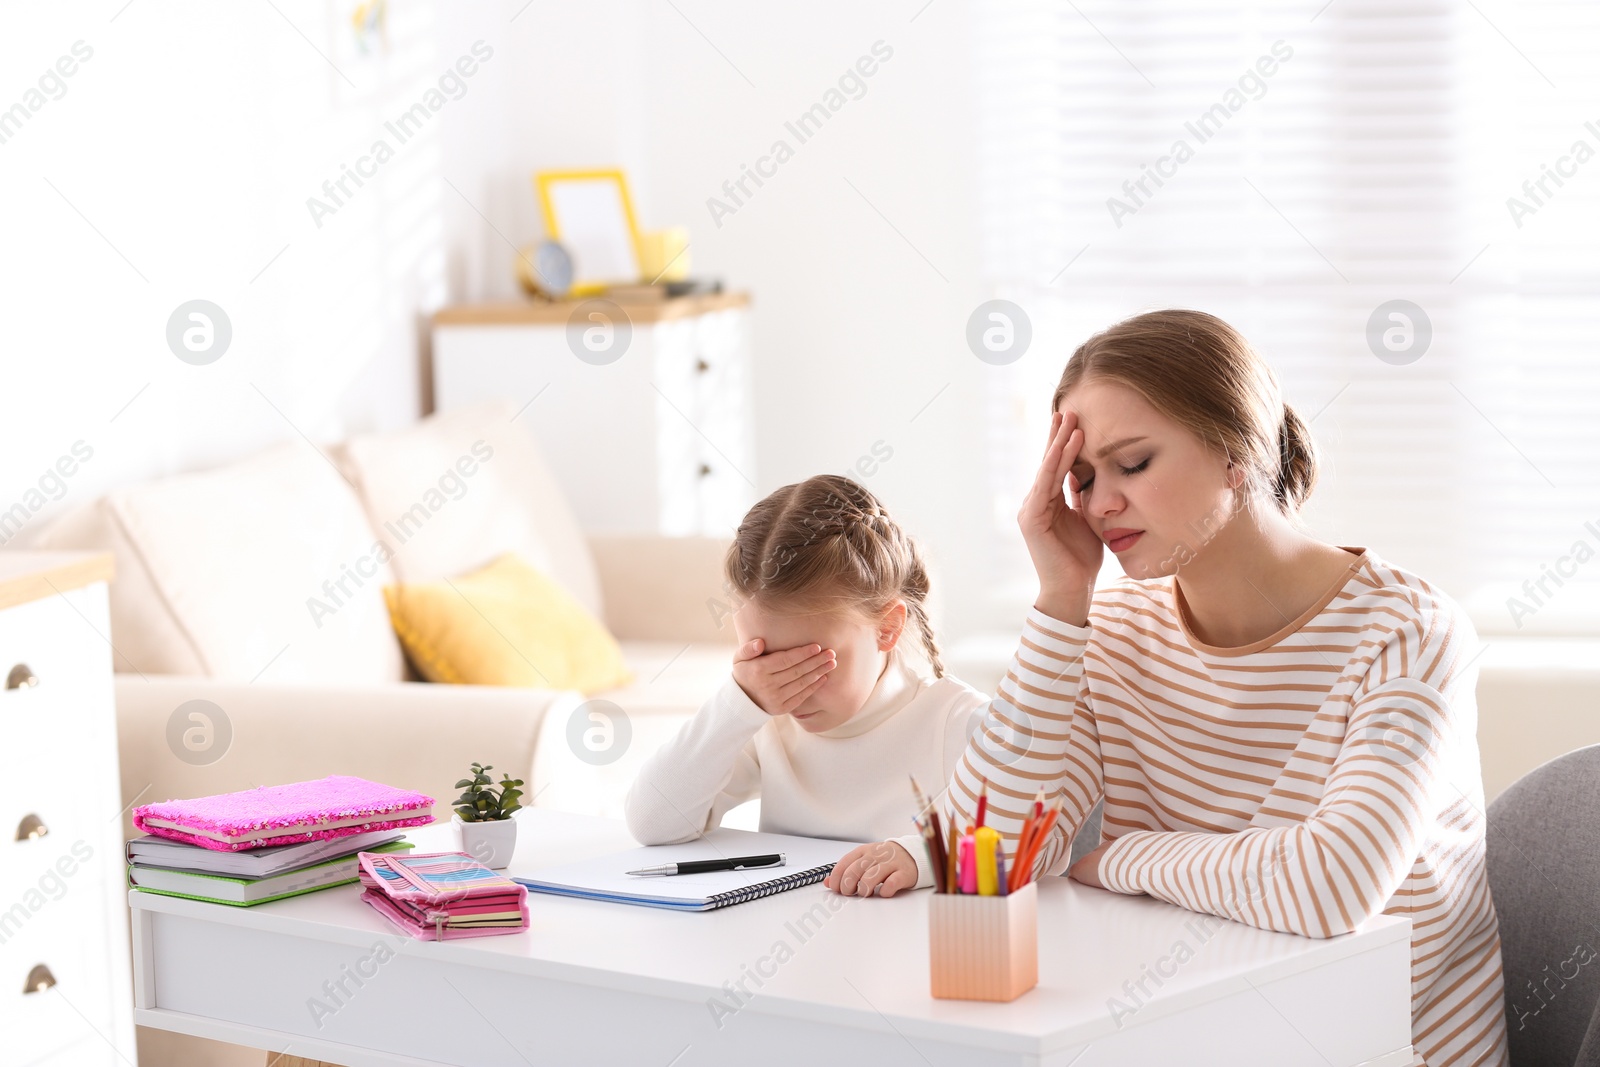 Photo of Upset mother and daughter doing homework together at table indoors